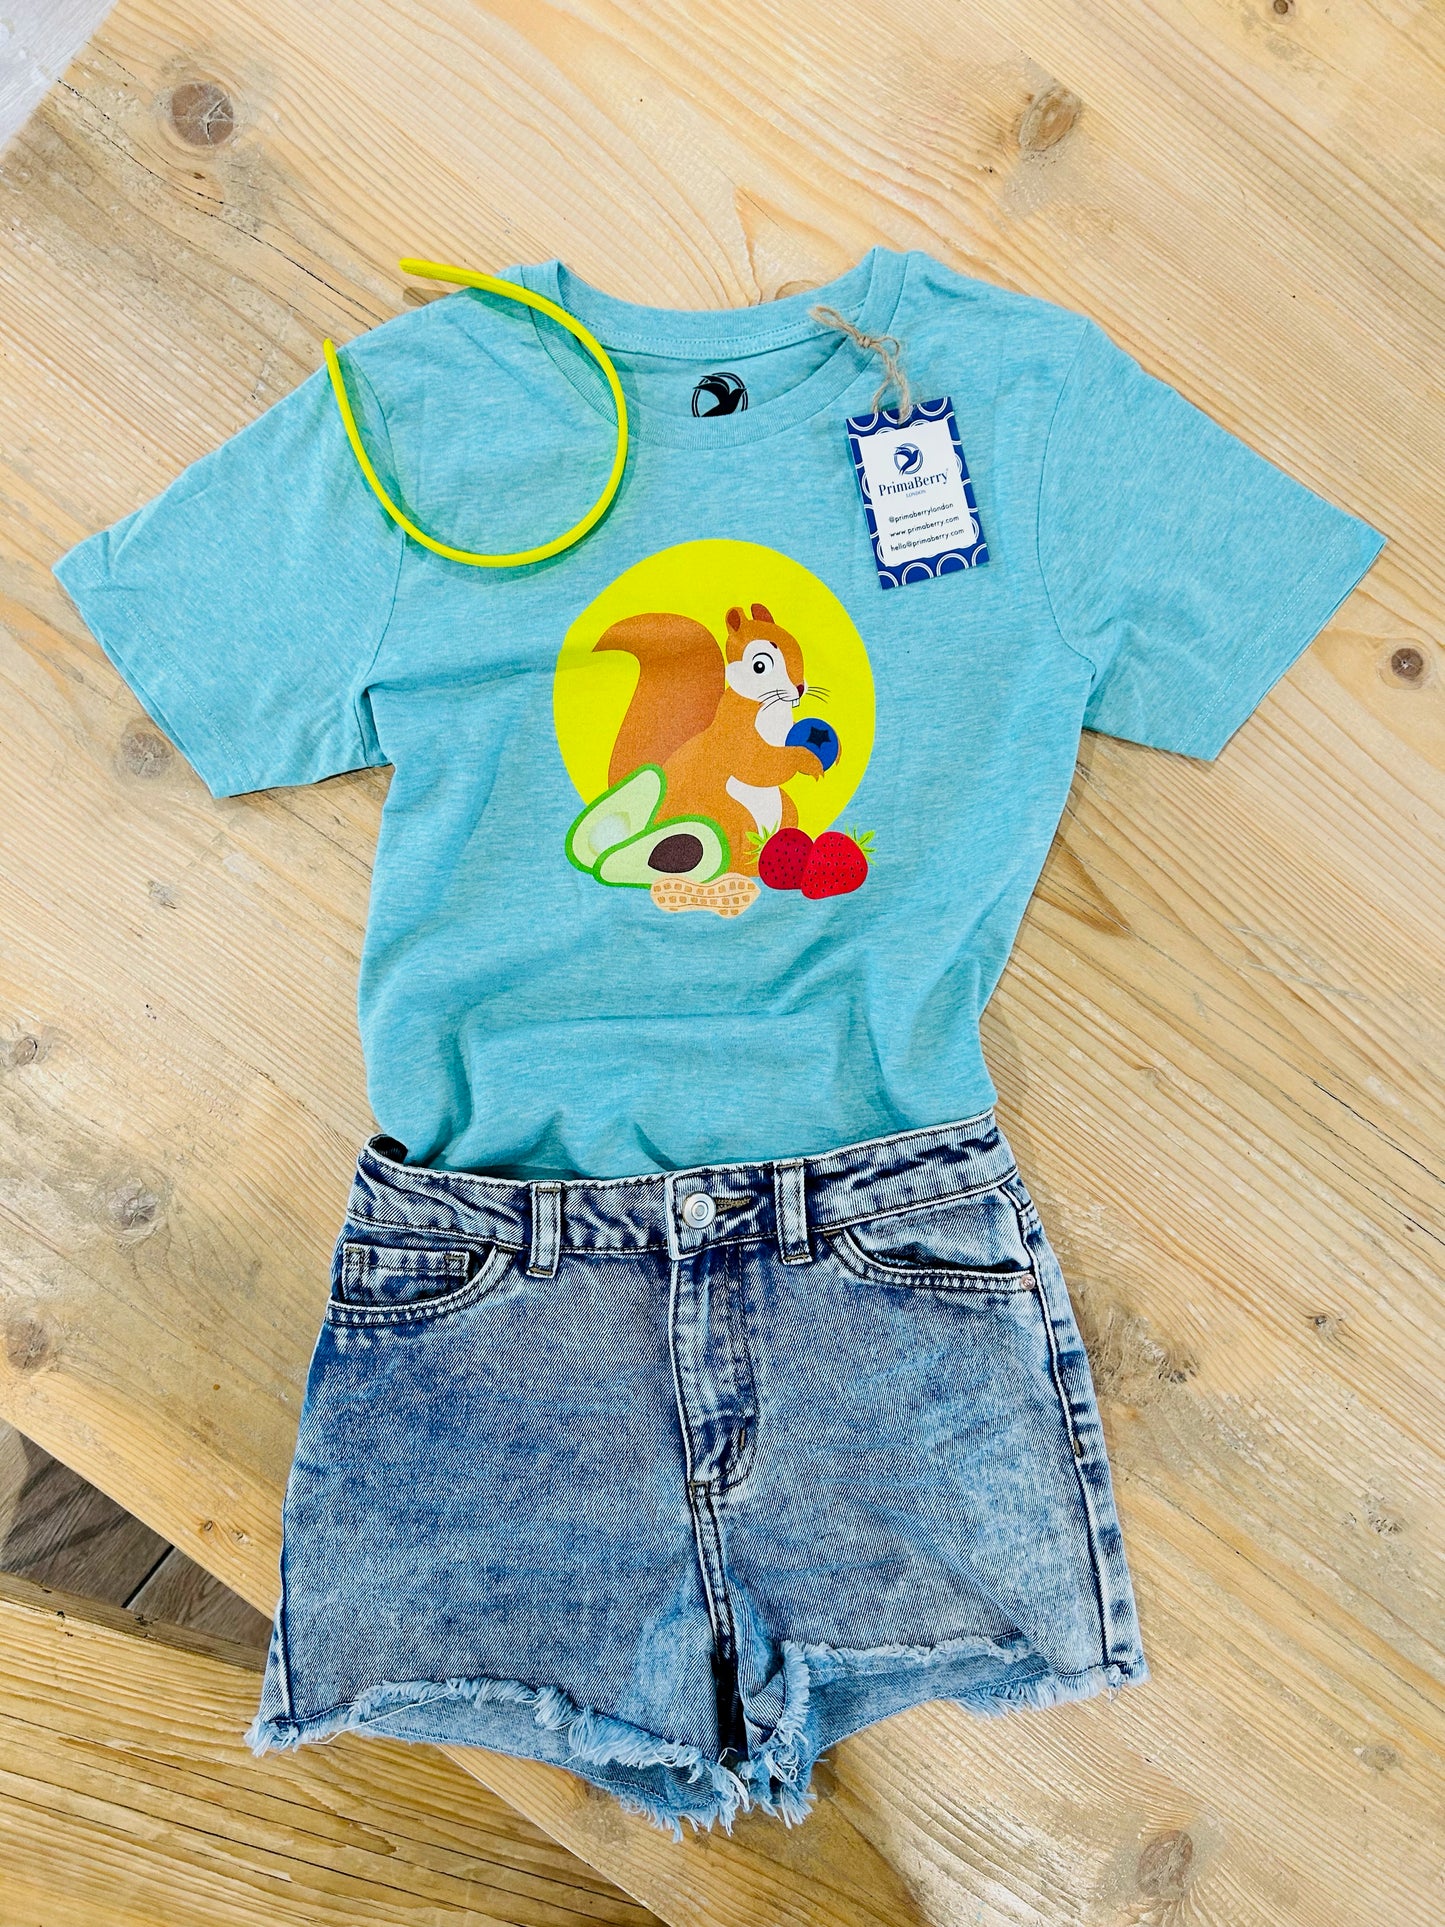 Squirrel Green Organic Cotton T-Shirt for Kids: Sustainable and Stylish T-Shirt